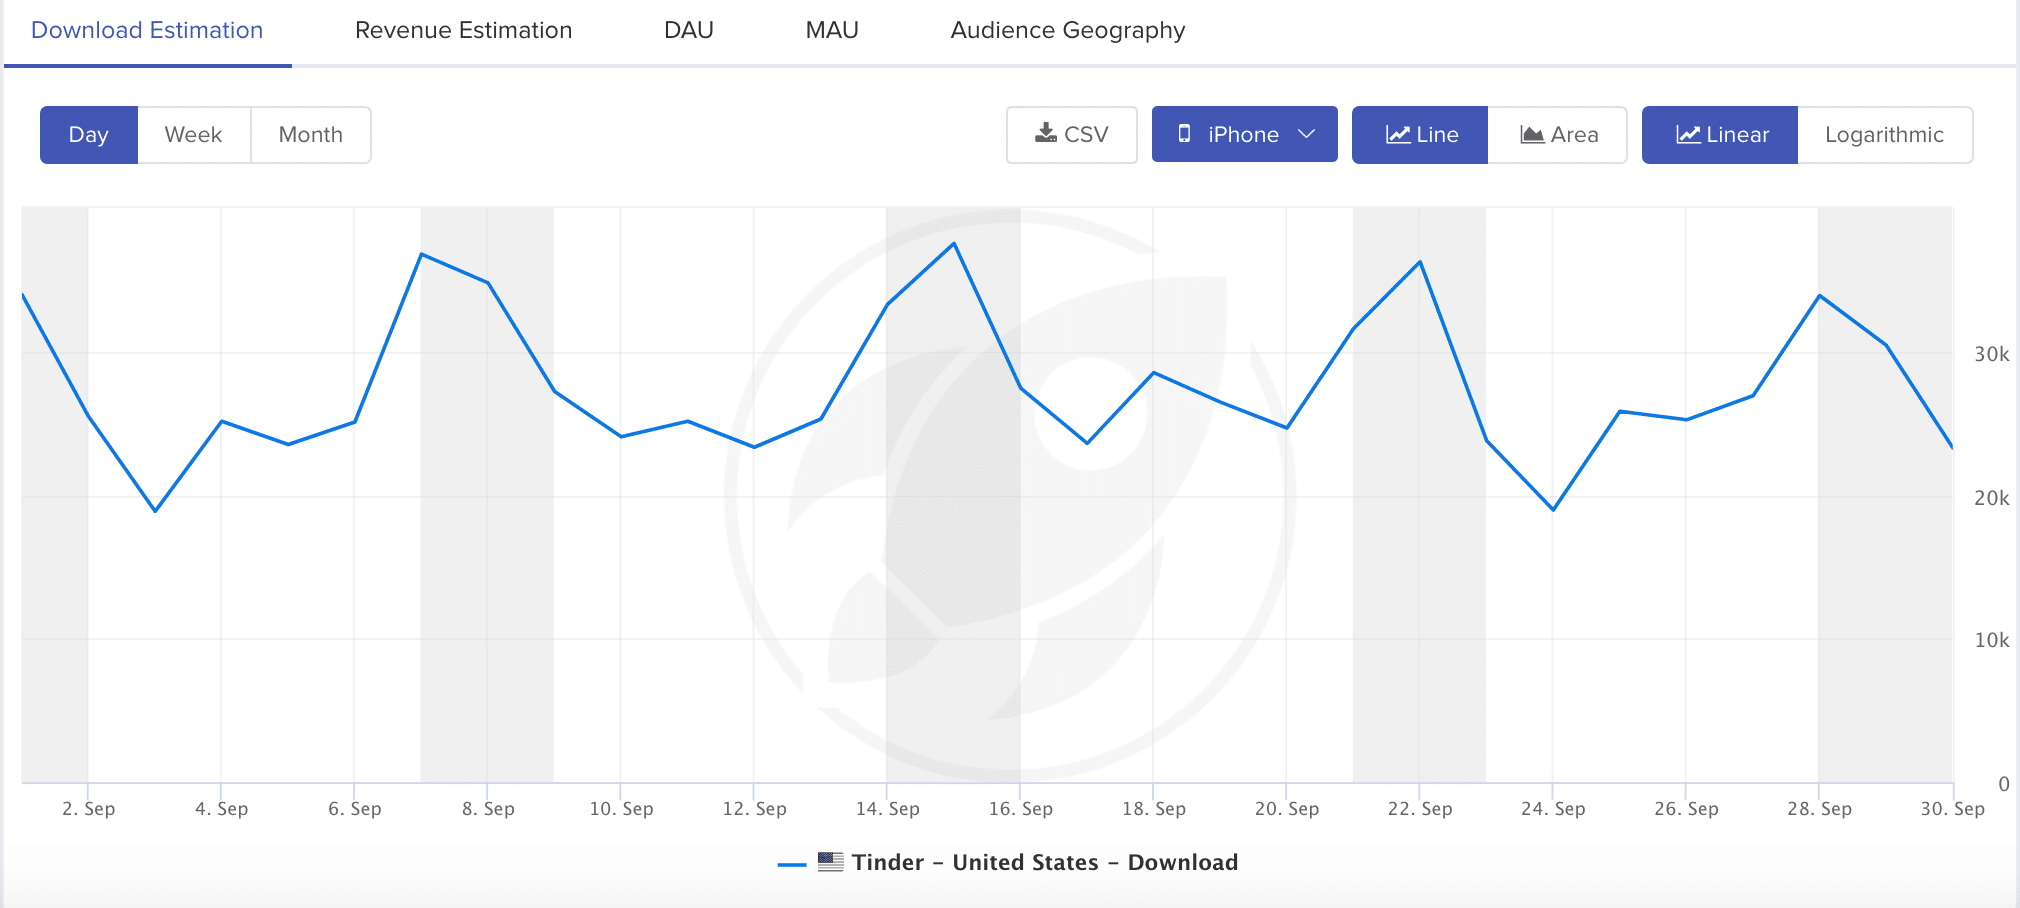 graph showing the download estimation of Tinder in september 2019